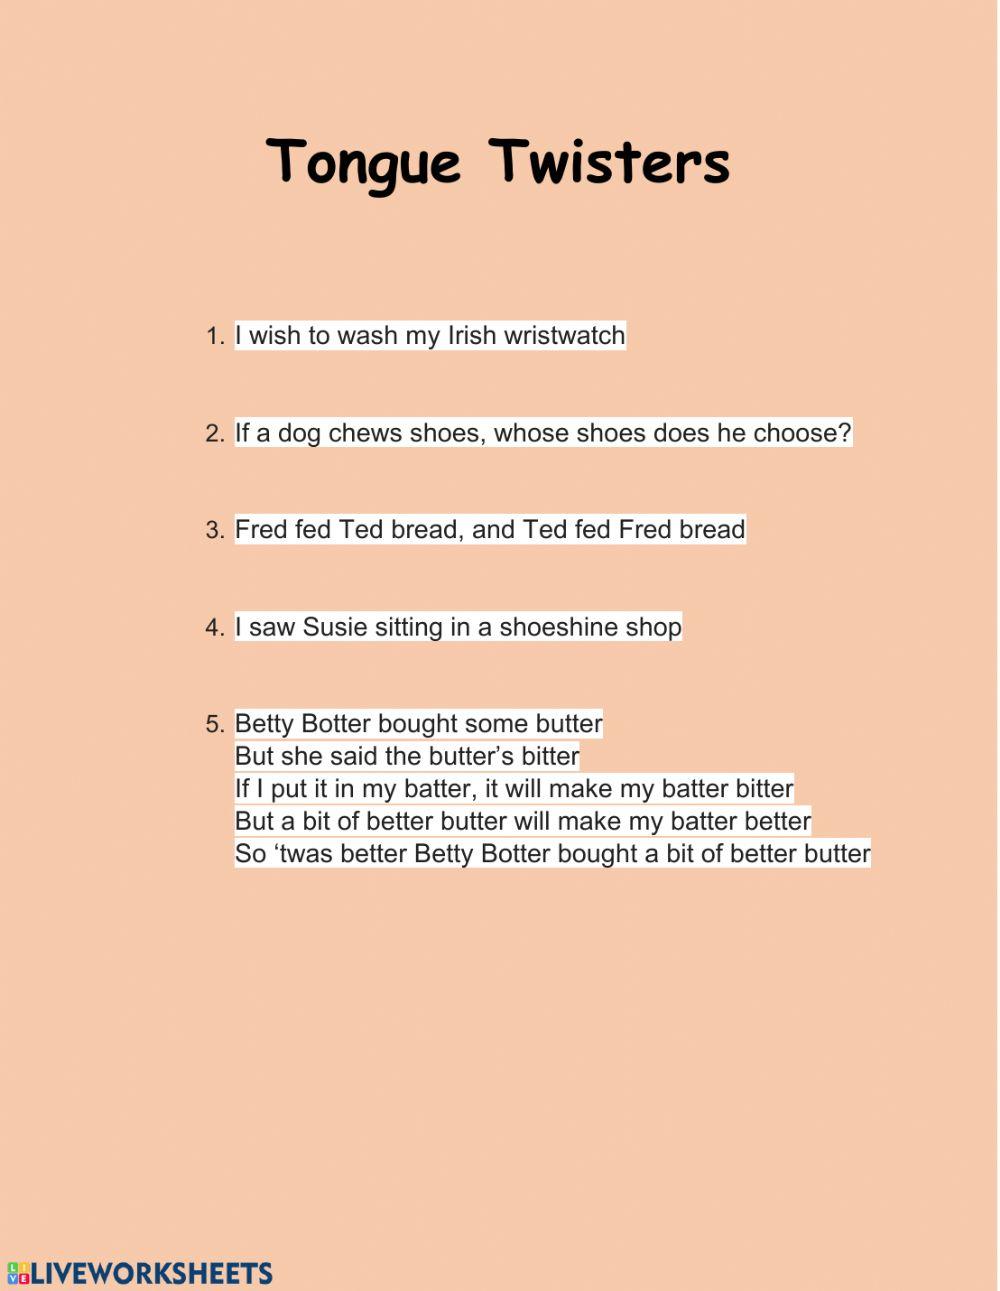 More Tongue Twisters